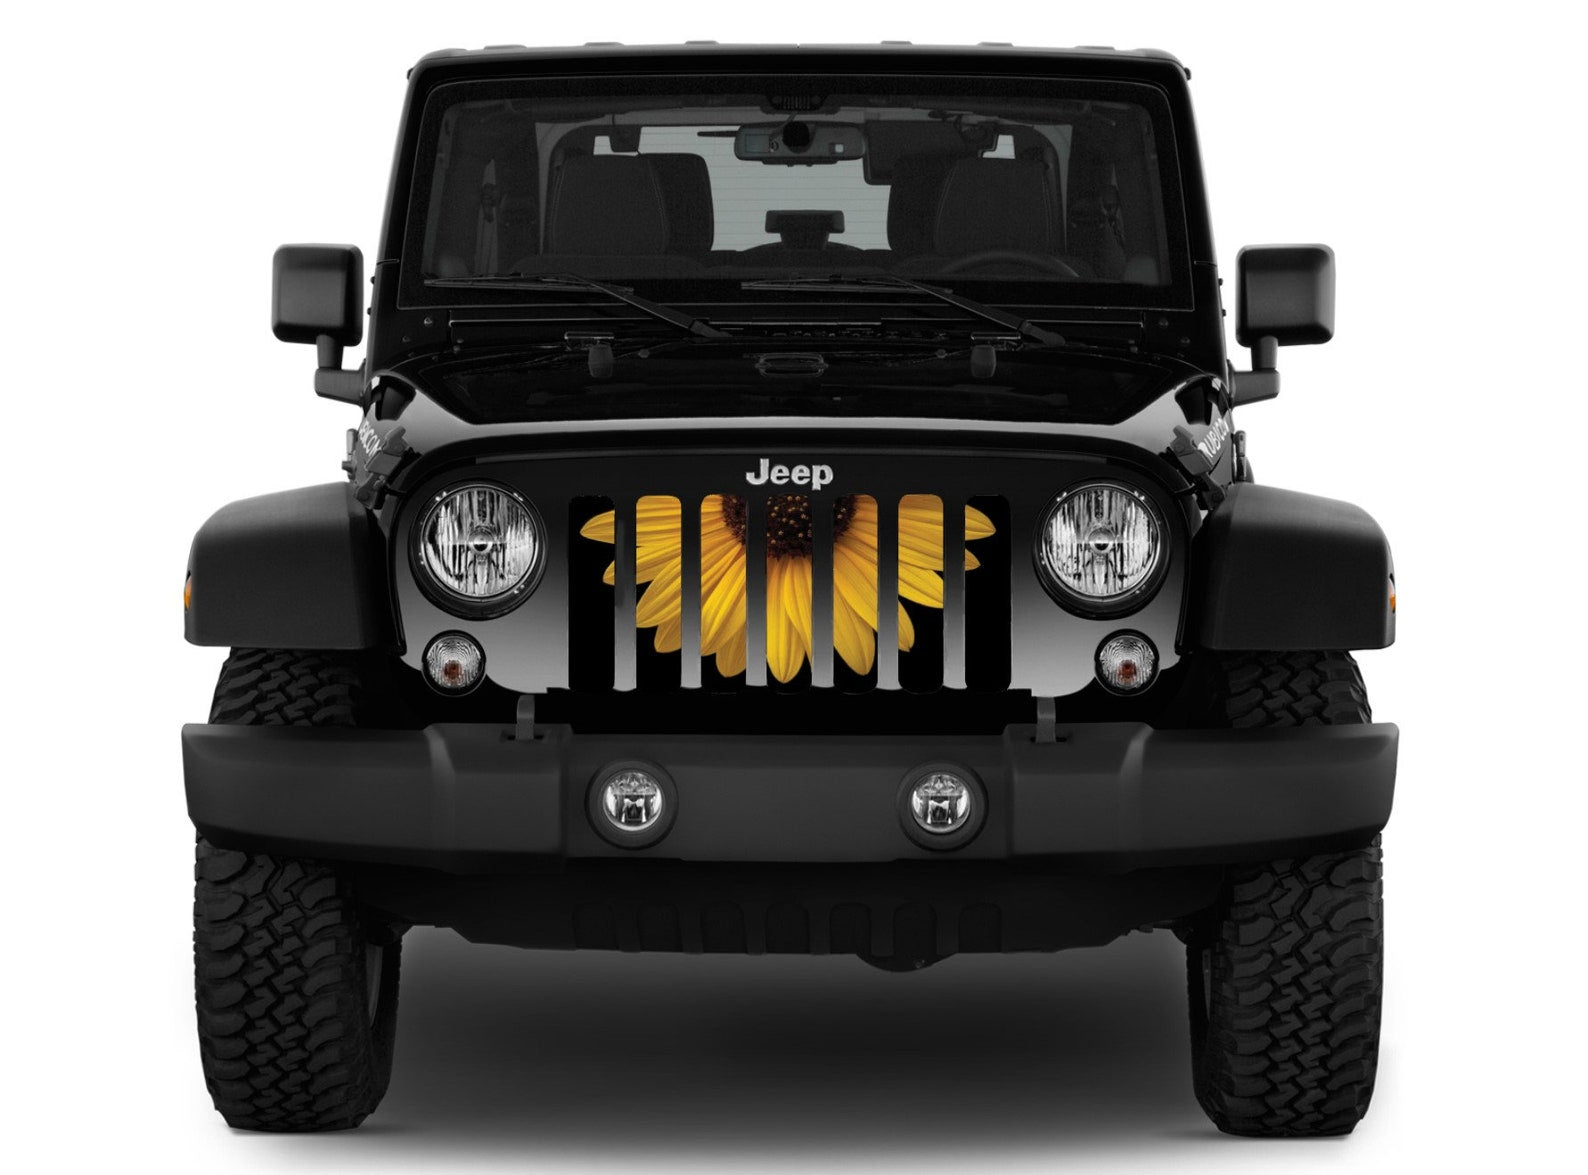 Half of a Sunflower design being showcased on a black Jeep Wrangler